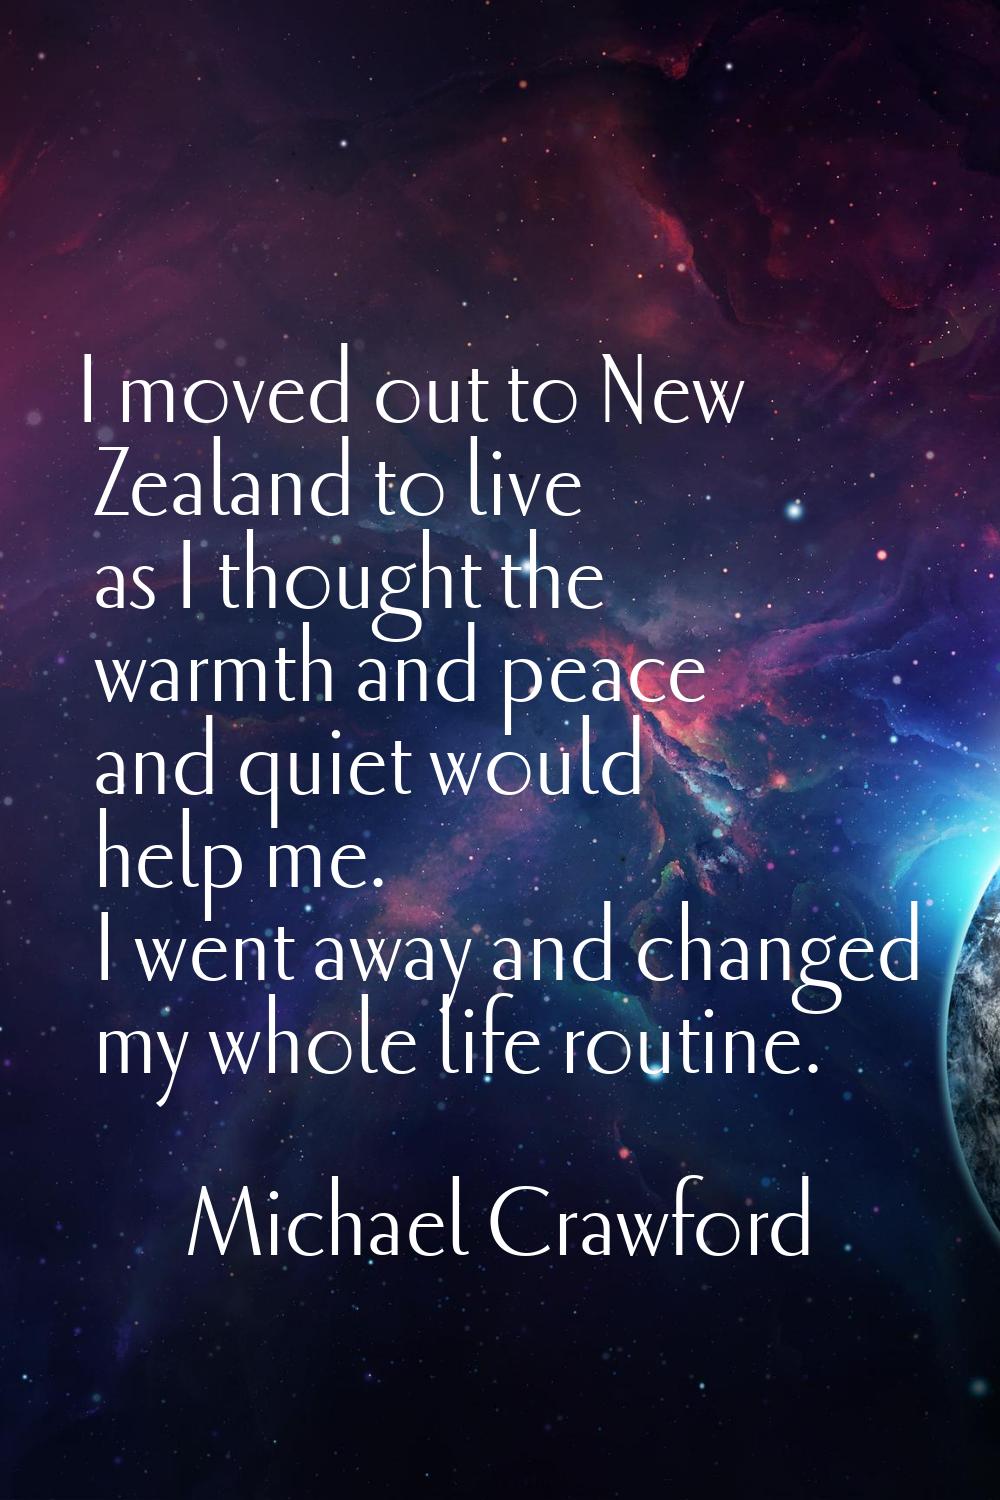 I moved out to New Zealand to live as I thought the warmth and peace and quiet would help me. I wen